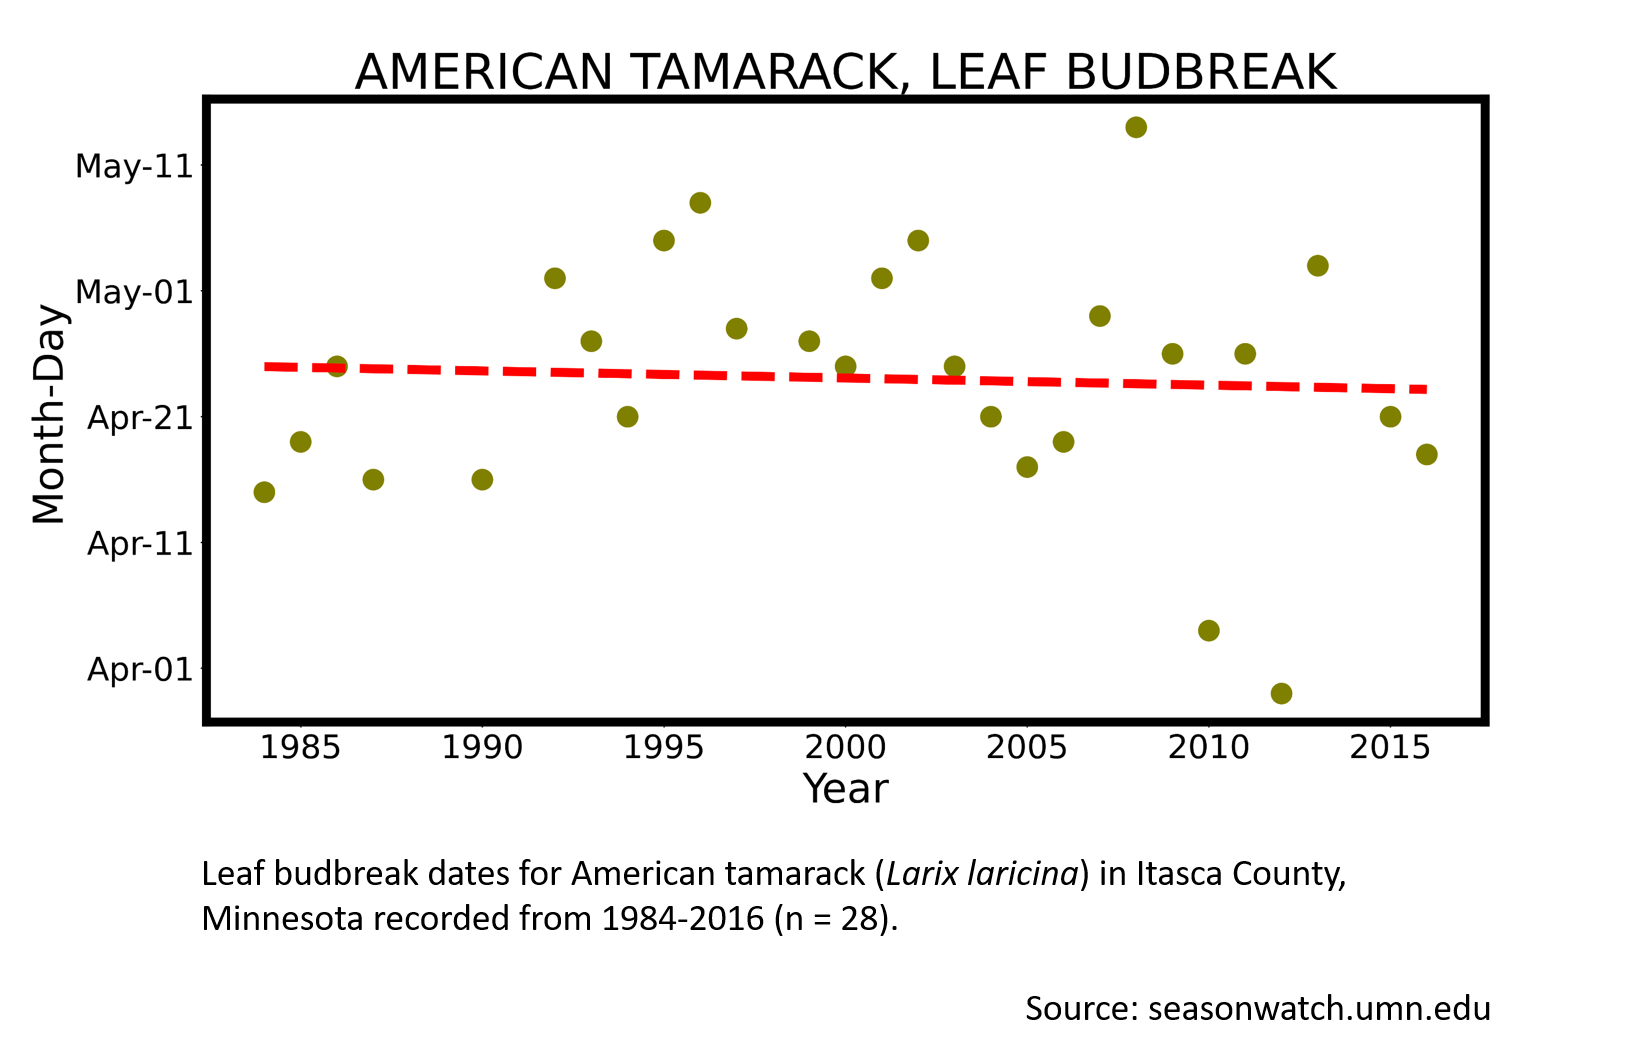 Scatterplot showing American tamarack phenology observations in Itasca County, Minnesota